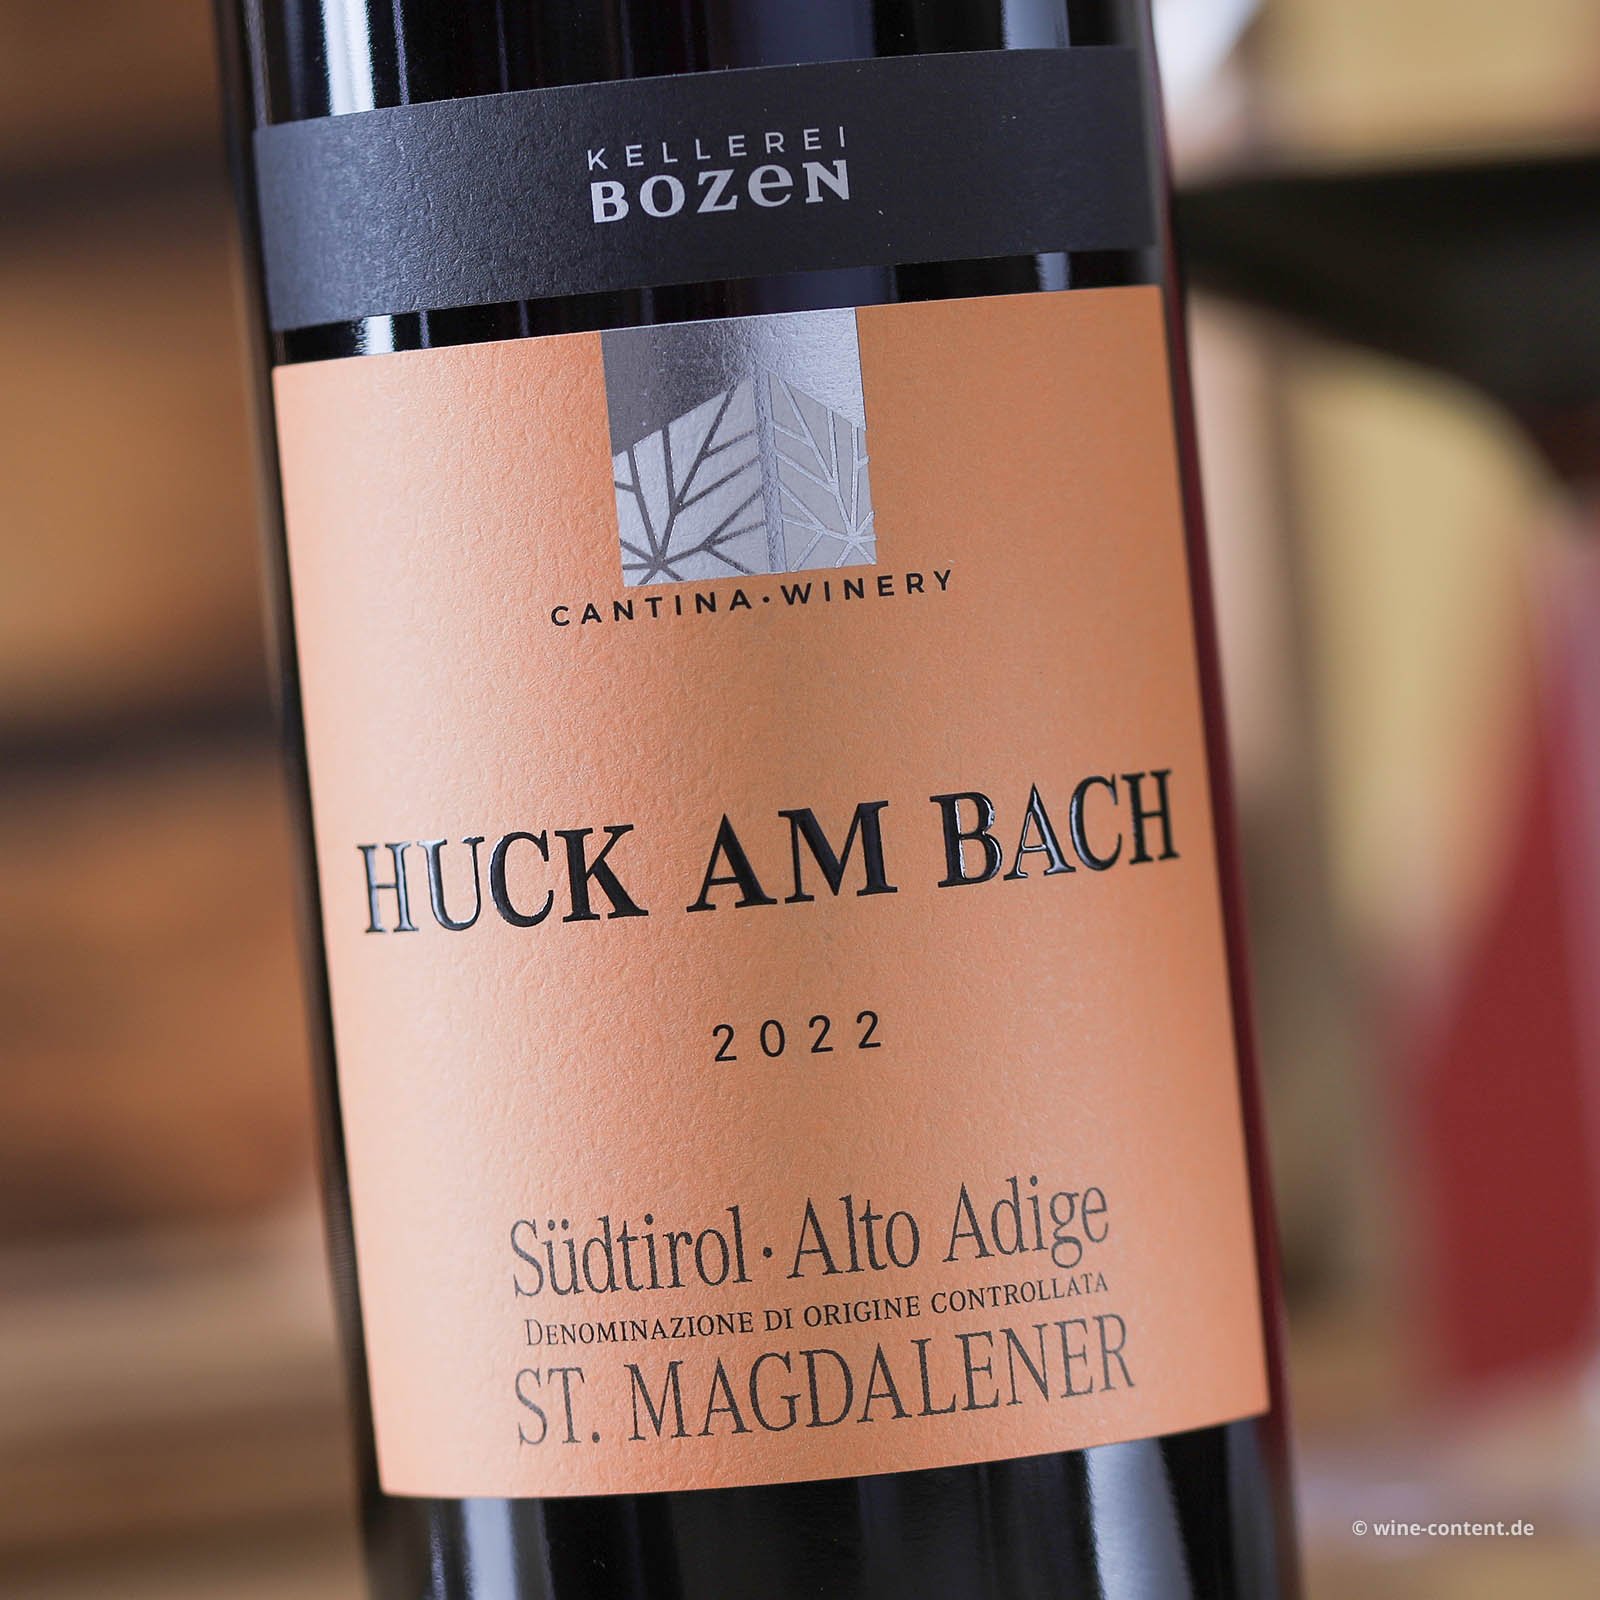 St. Magdalener Classico 2022 Huck am Bach